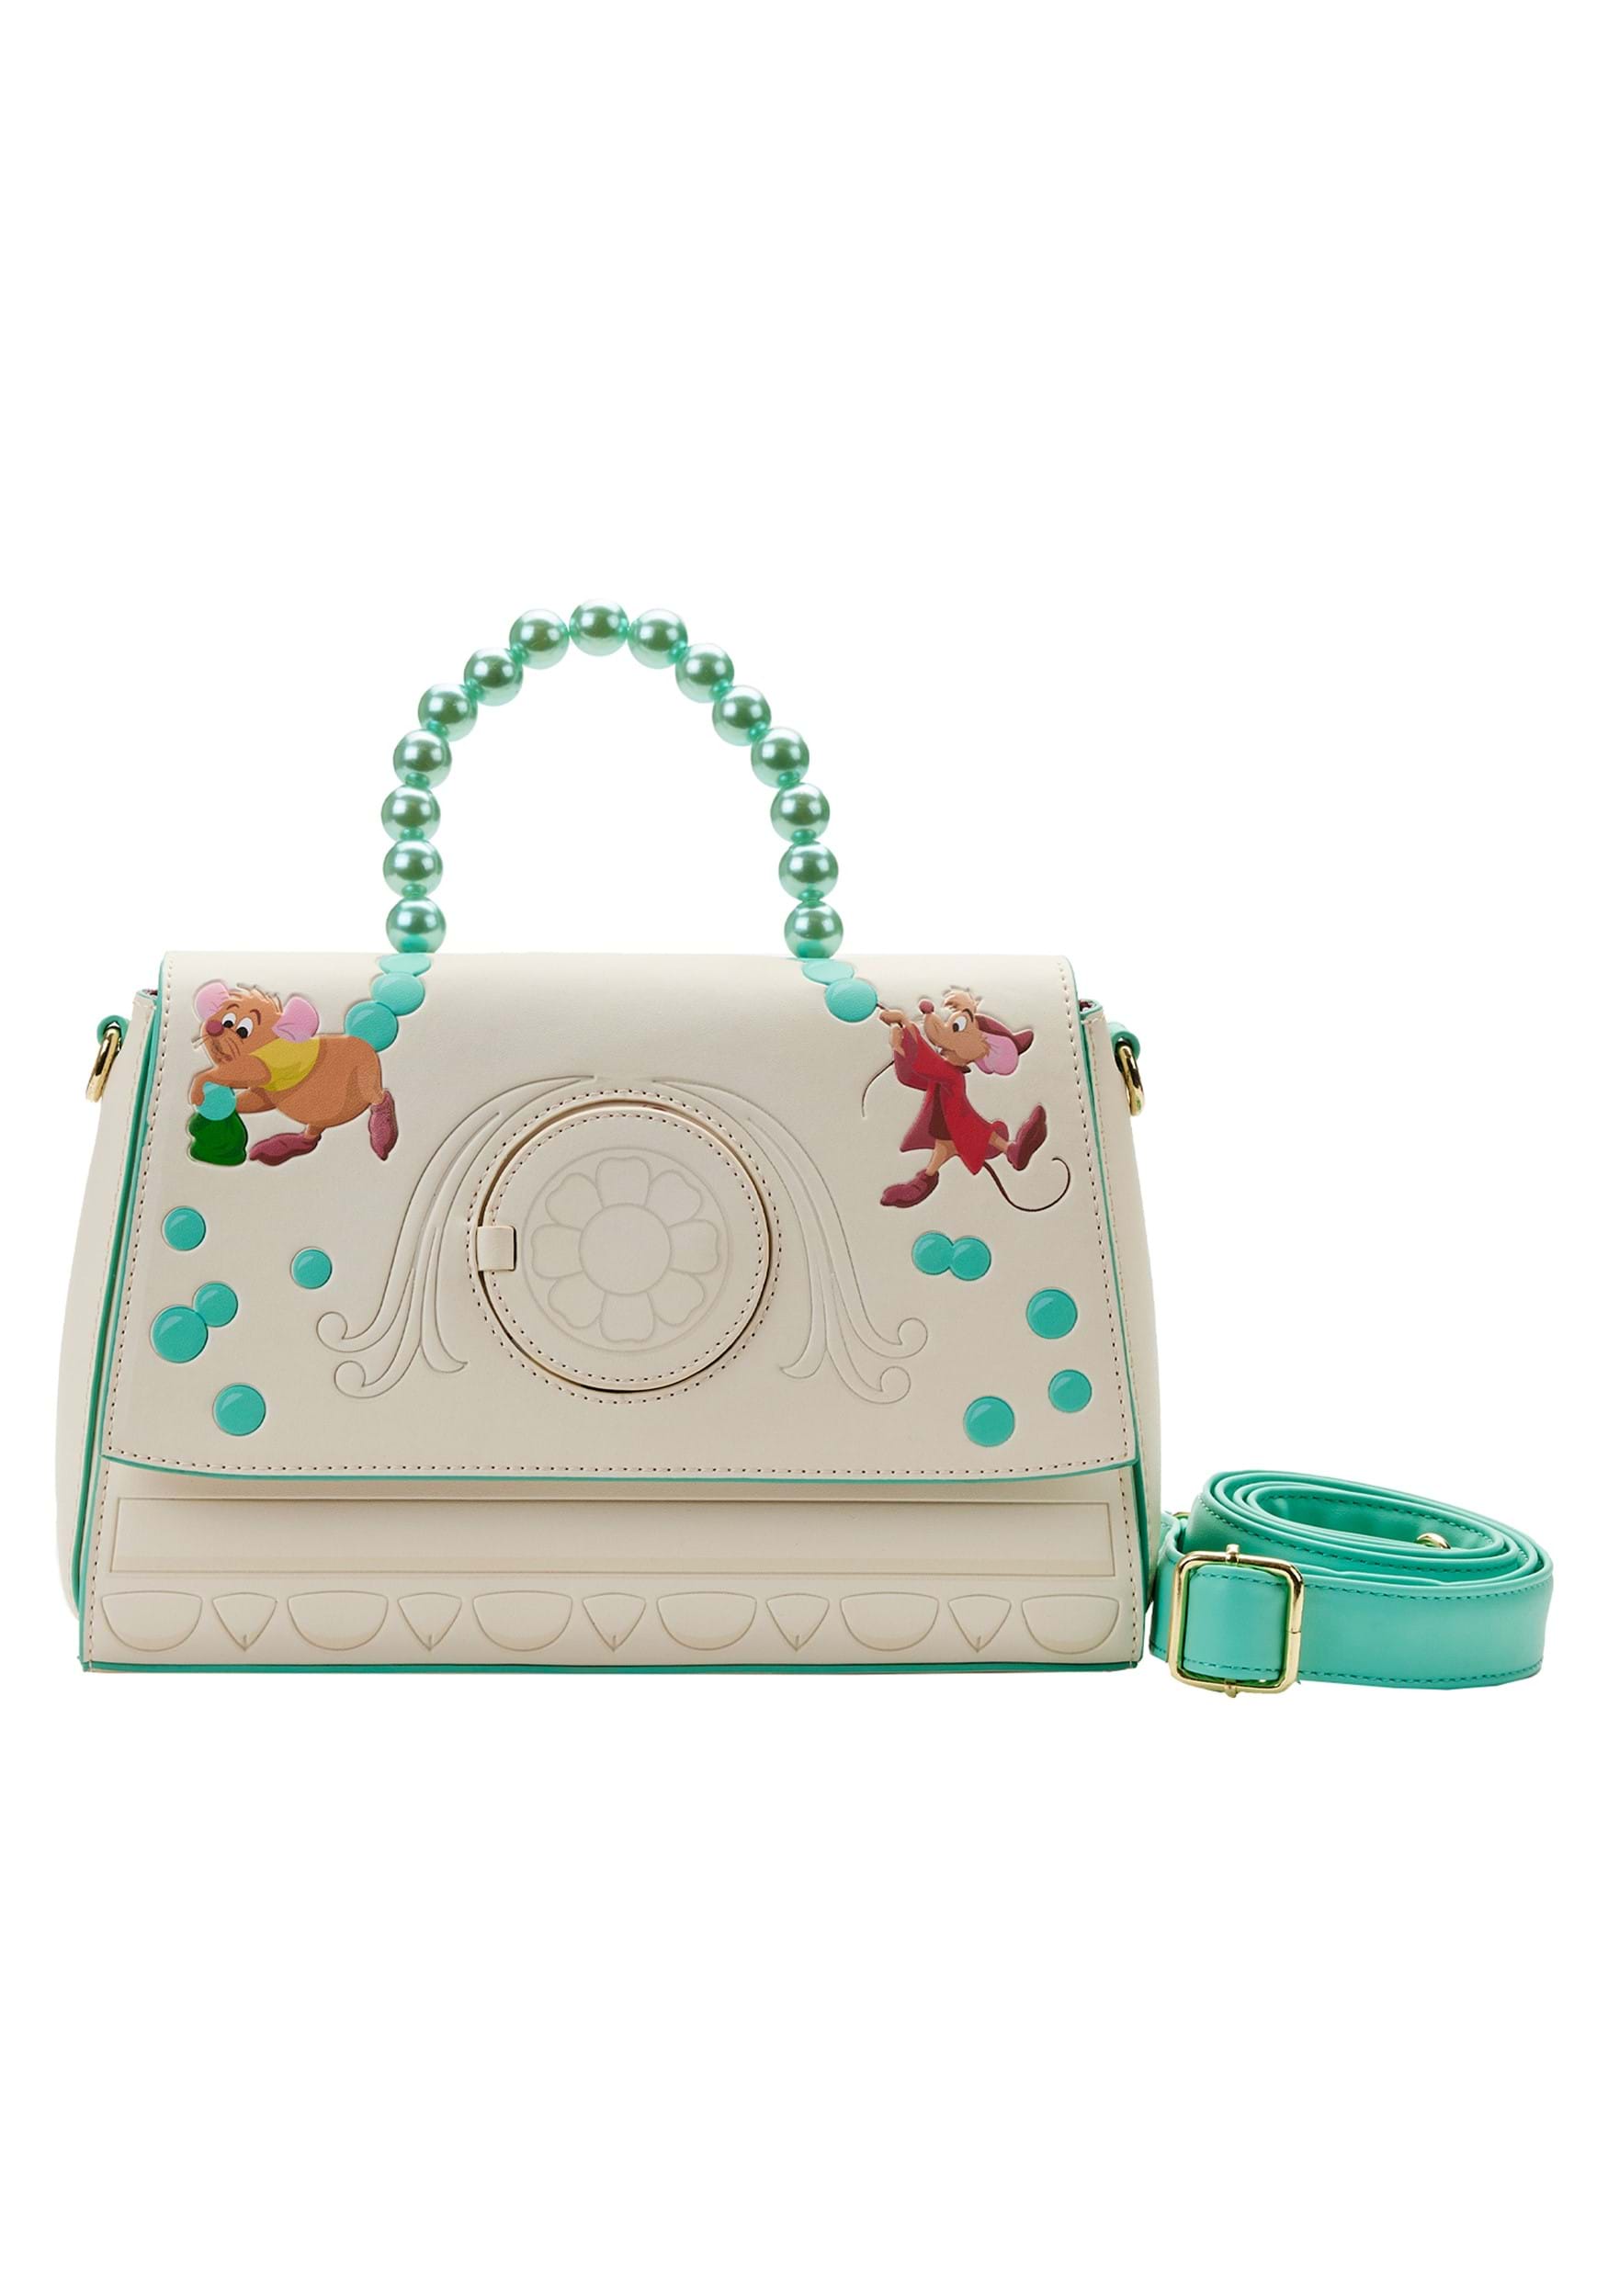 Loungefly Disney Cinderella Gus Gus and Jack Jack Purse for Women